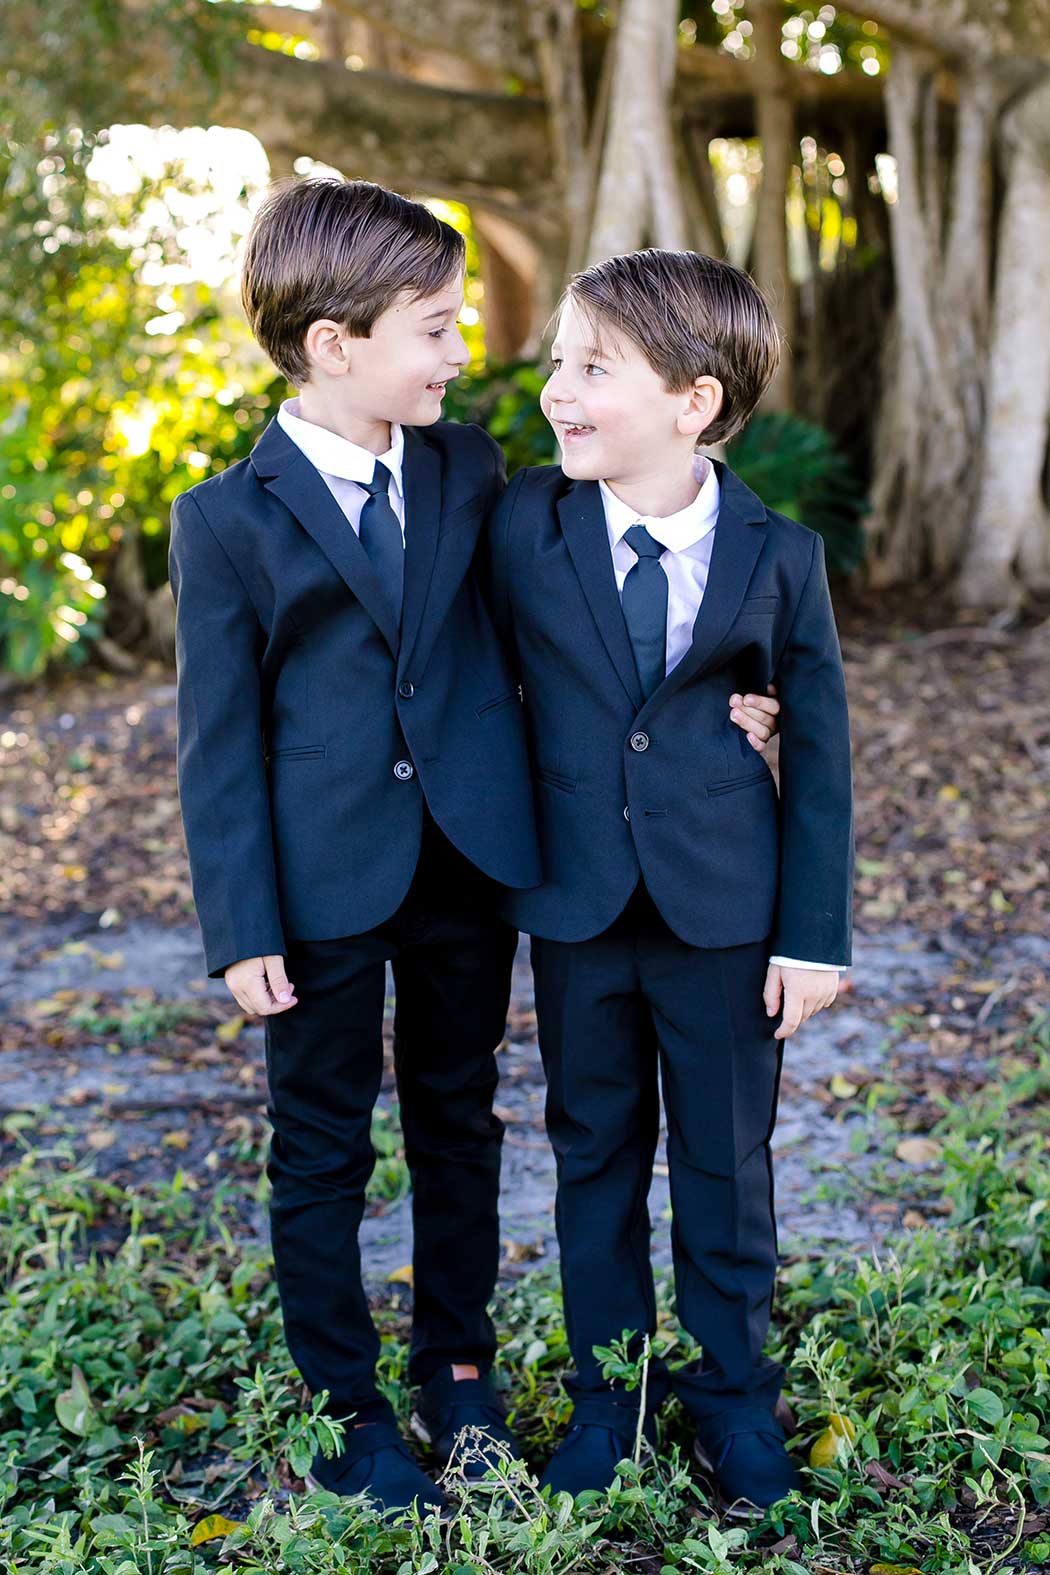 twin boys pose for photo | twin 5-year old boys photographs | family photo session fort lauderdale | family photographer robbins preserve fort lauderdale | elegant family photoshoot